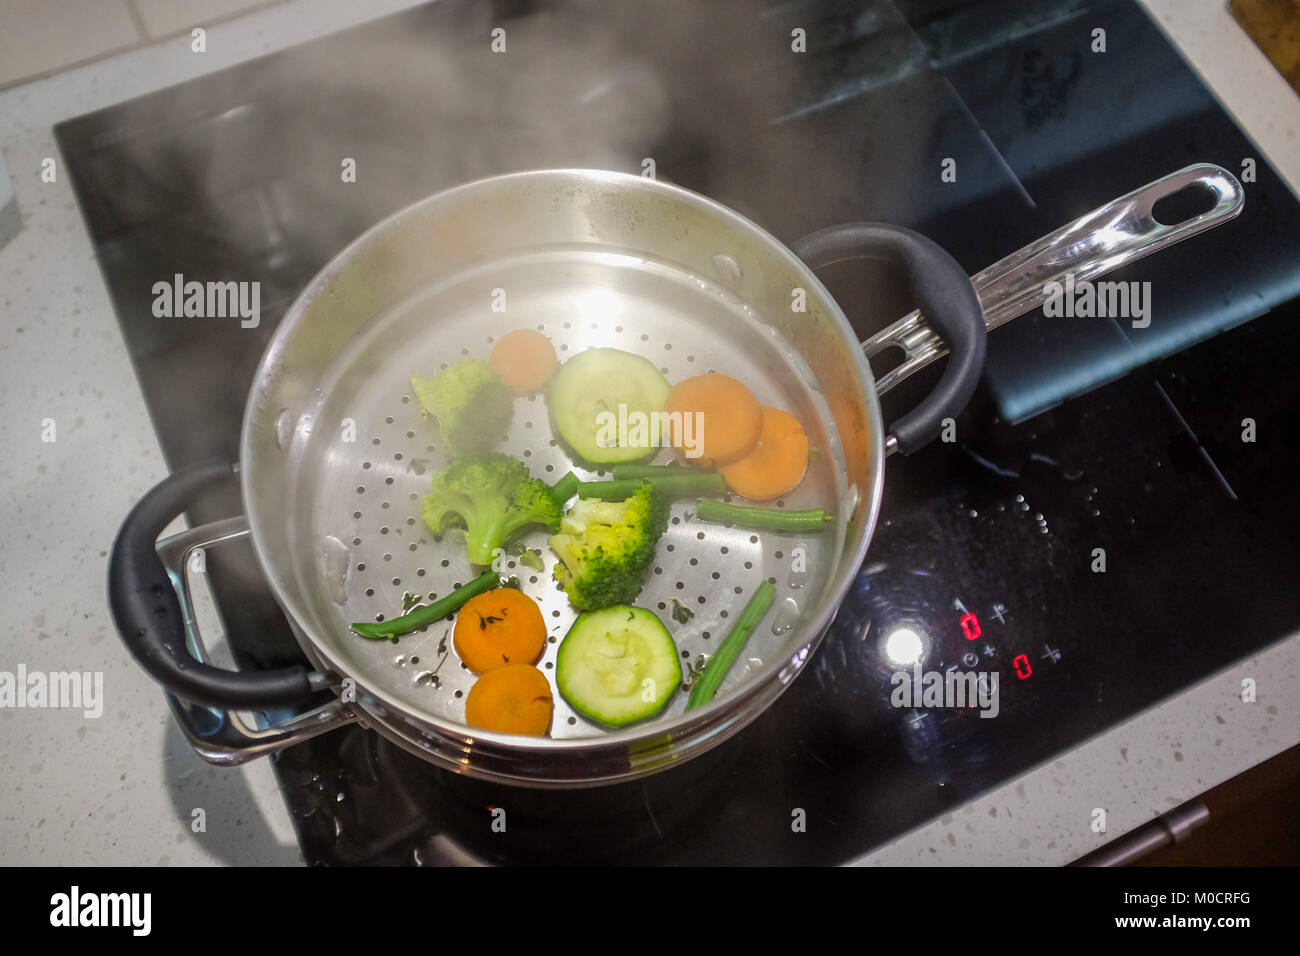 Healthy cooking steamed vegetables of cauliflower , broccoli and courgette Stock Photo